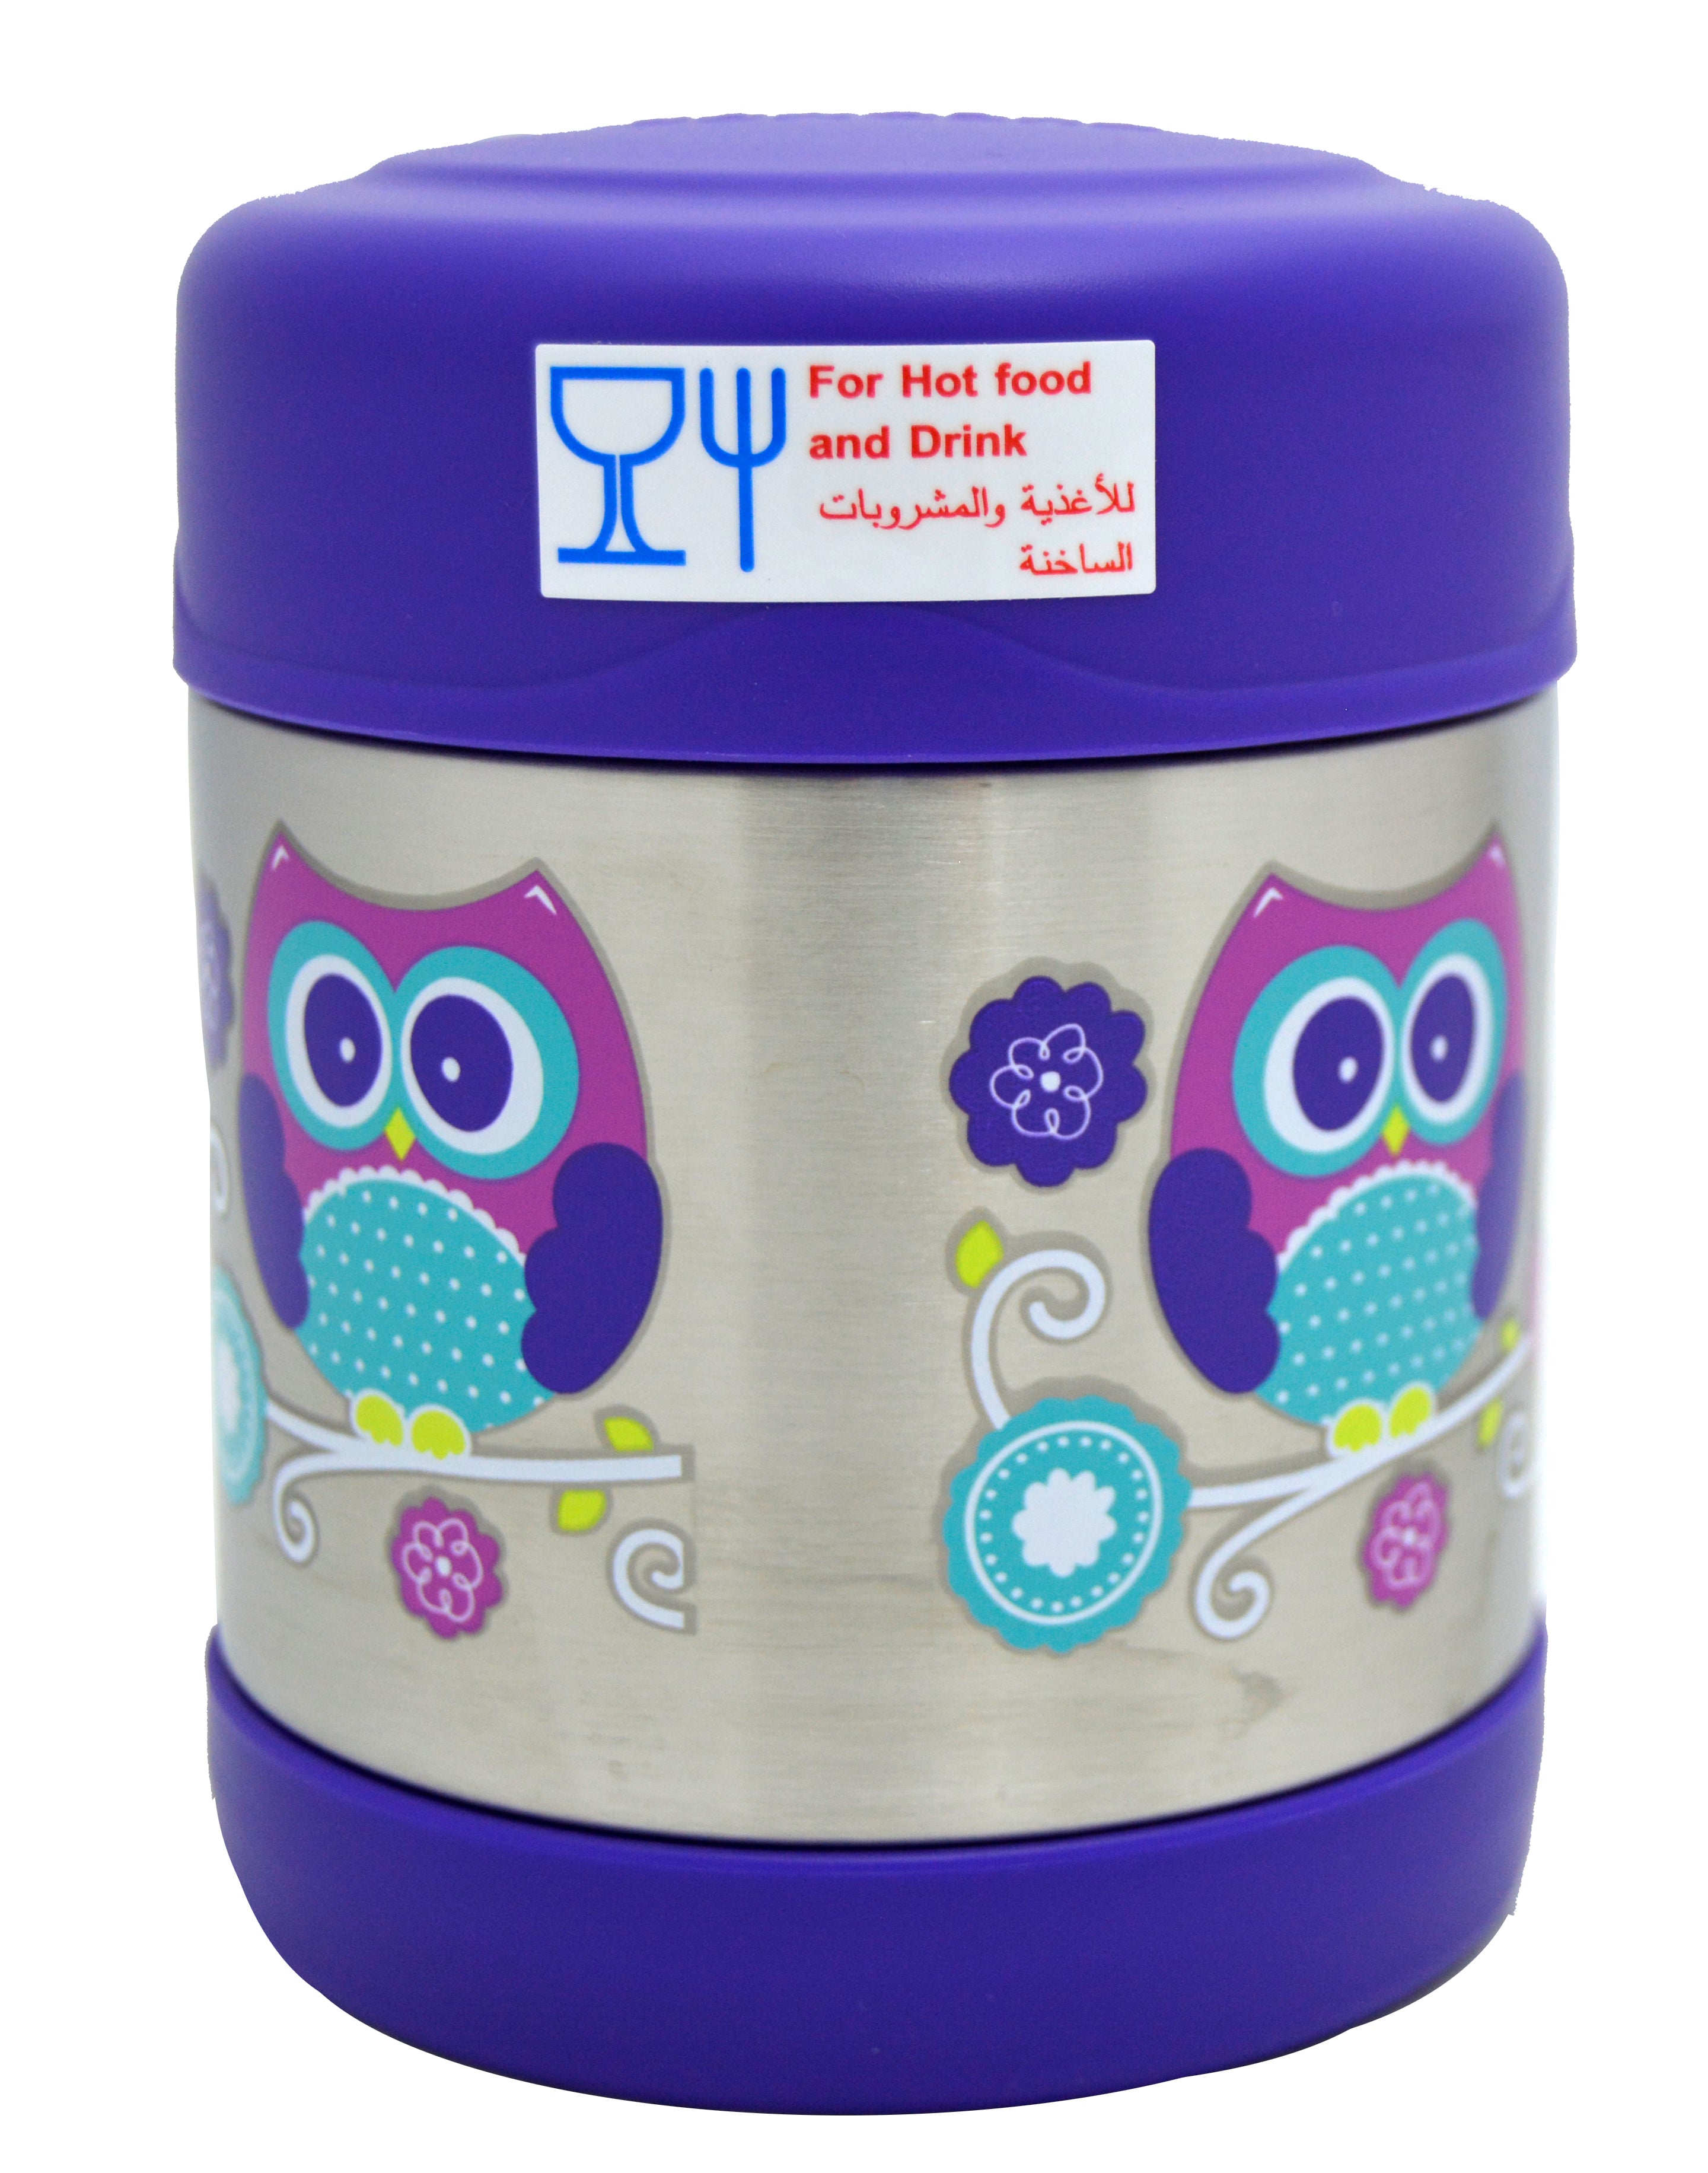 Thermos Funtainer Stainless Steel Food Jar - Owl 290 ml